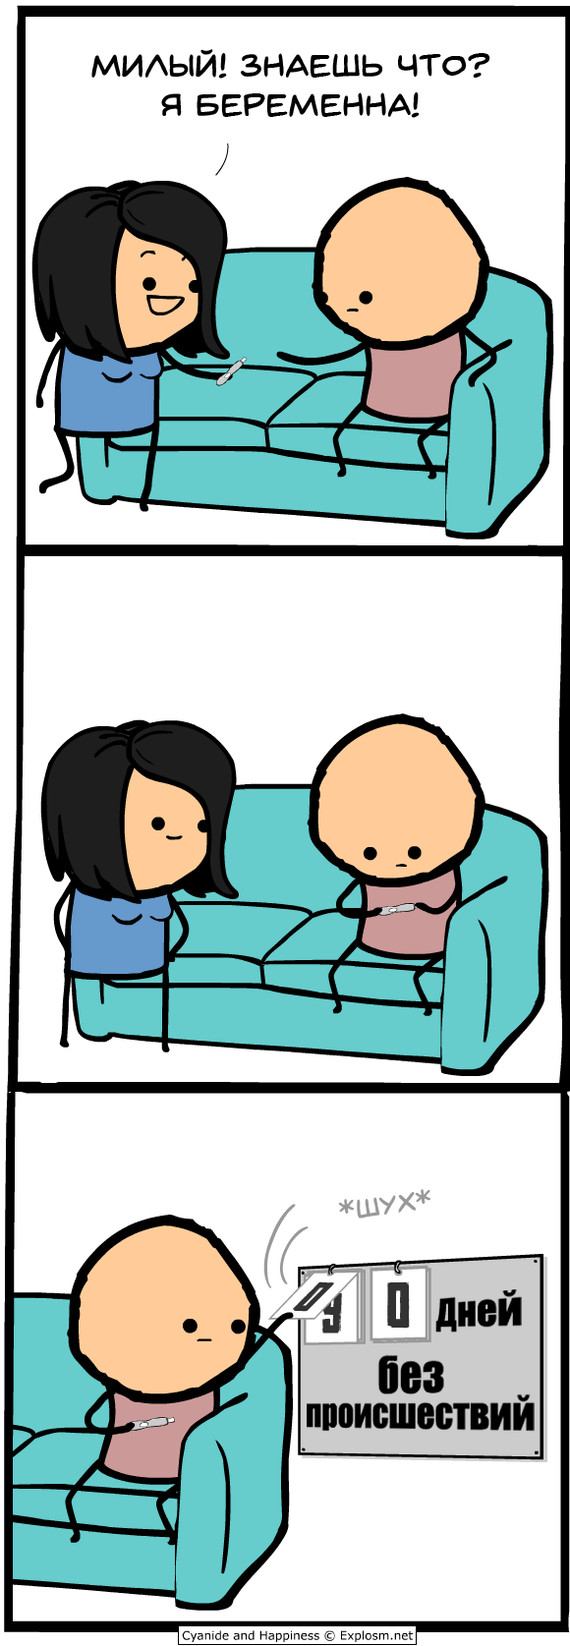  Cyanide and Happiness, , , , 